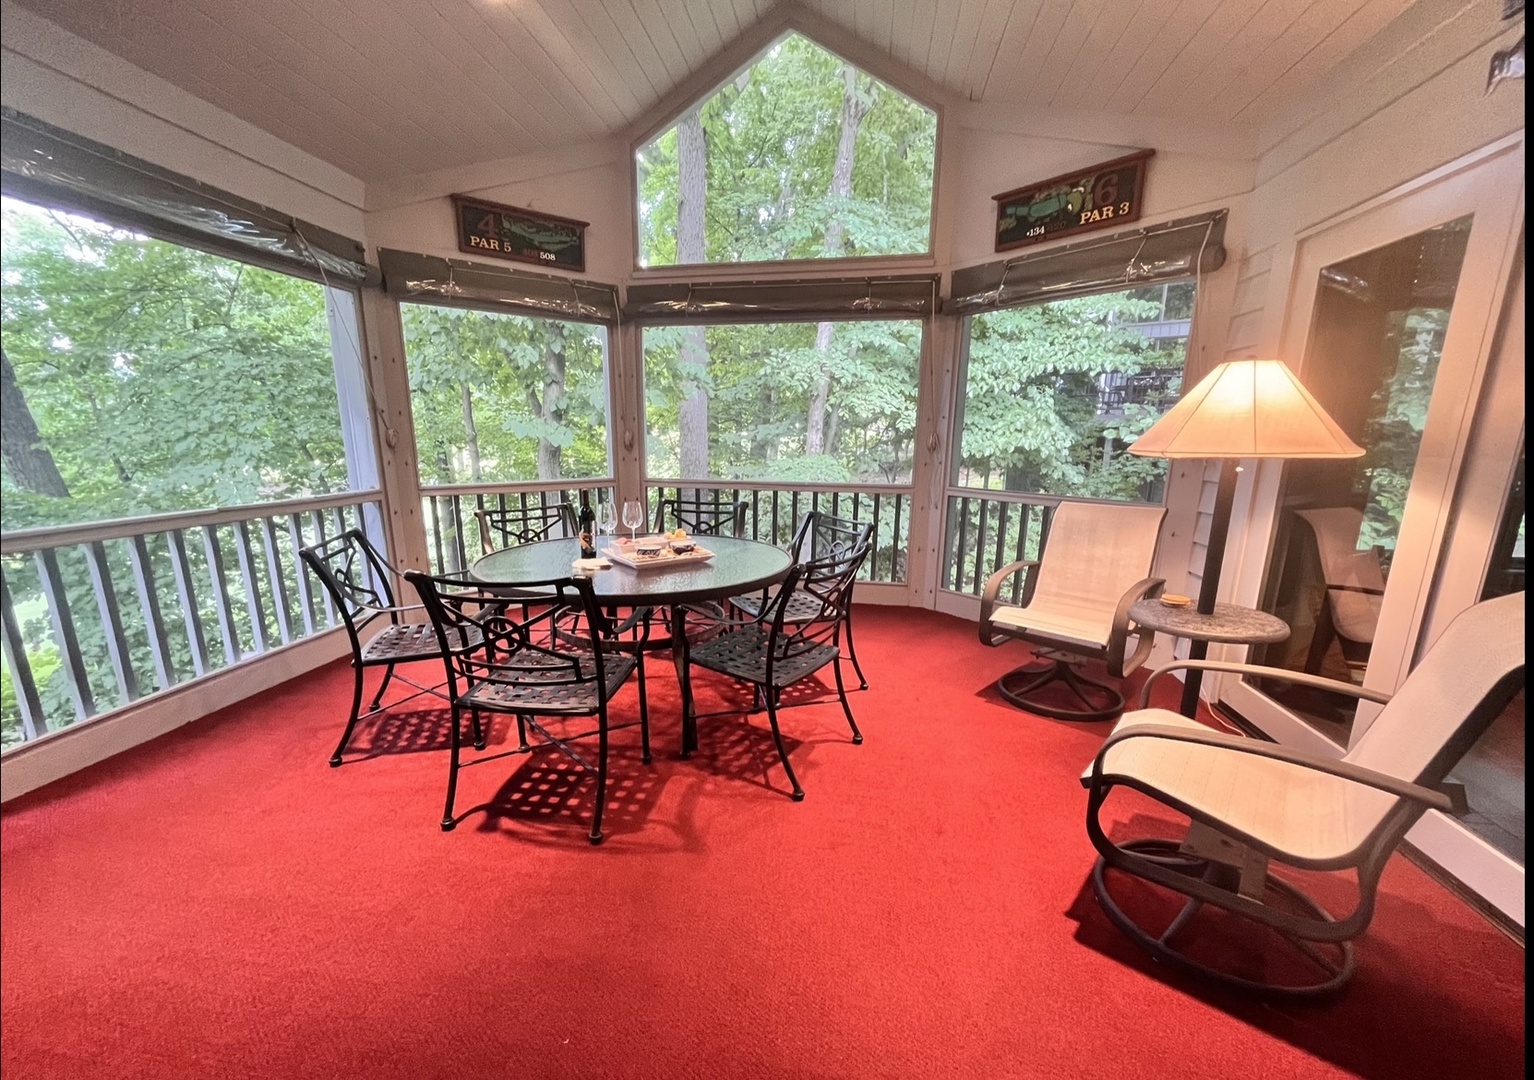 Lounge the day away or dine together in the airy sunroom